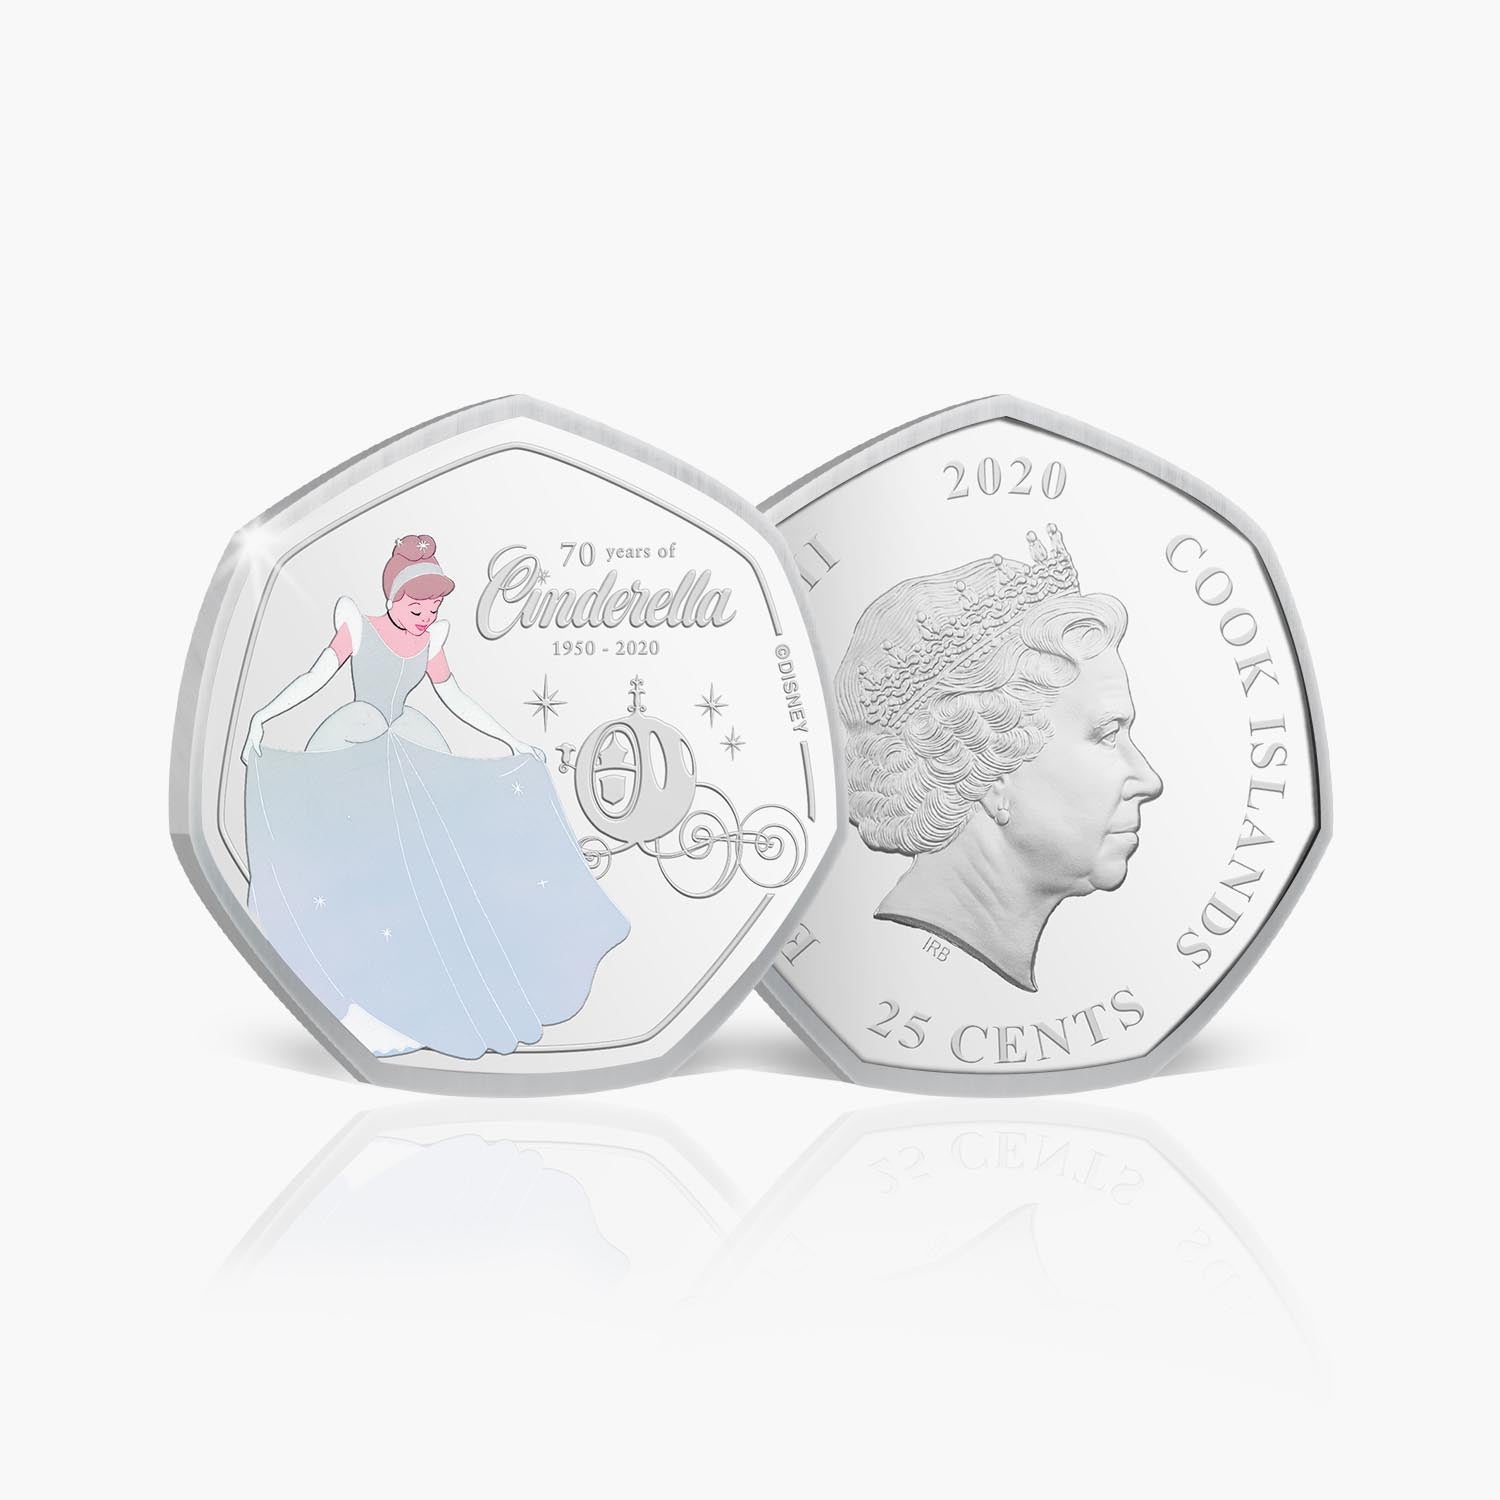 Unforgettable Silver Plated Coin